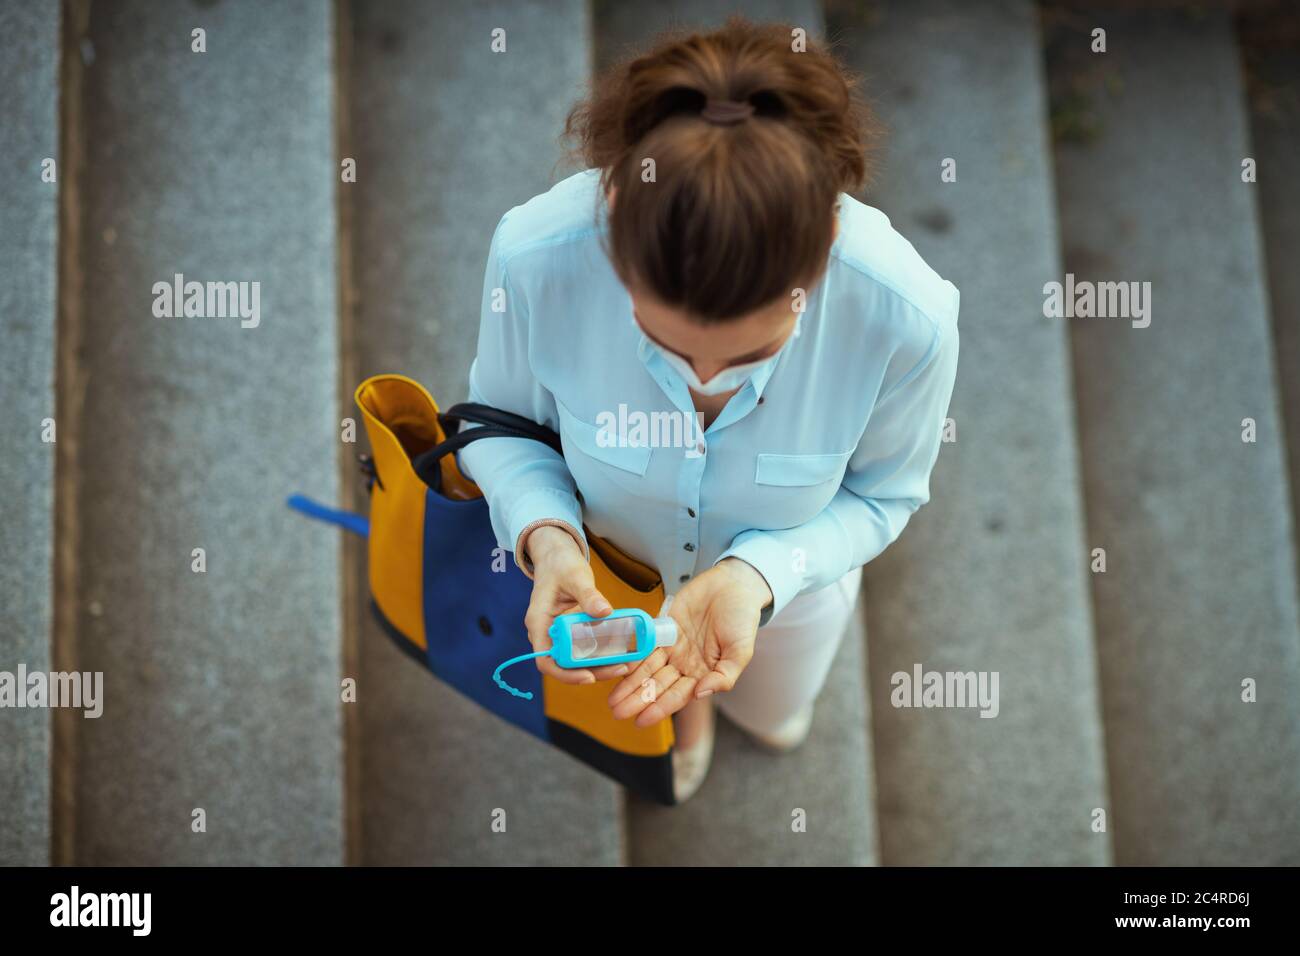 Life during coronavirus pandemic. Upper view of trendy woman in blue blouse with medical mask and handbag disinfecting hands with an antibacterial age Stock Photo